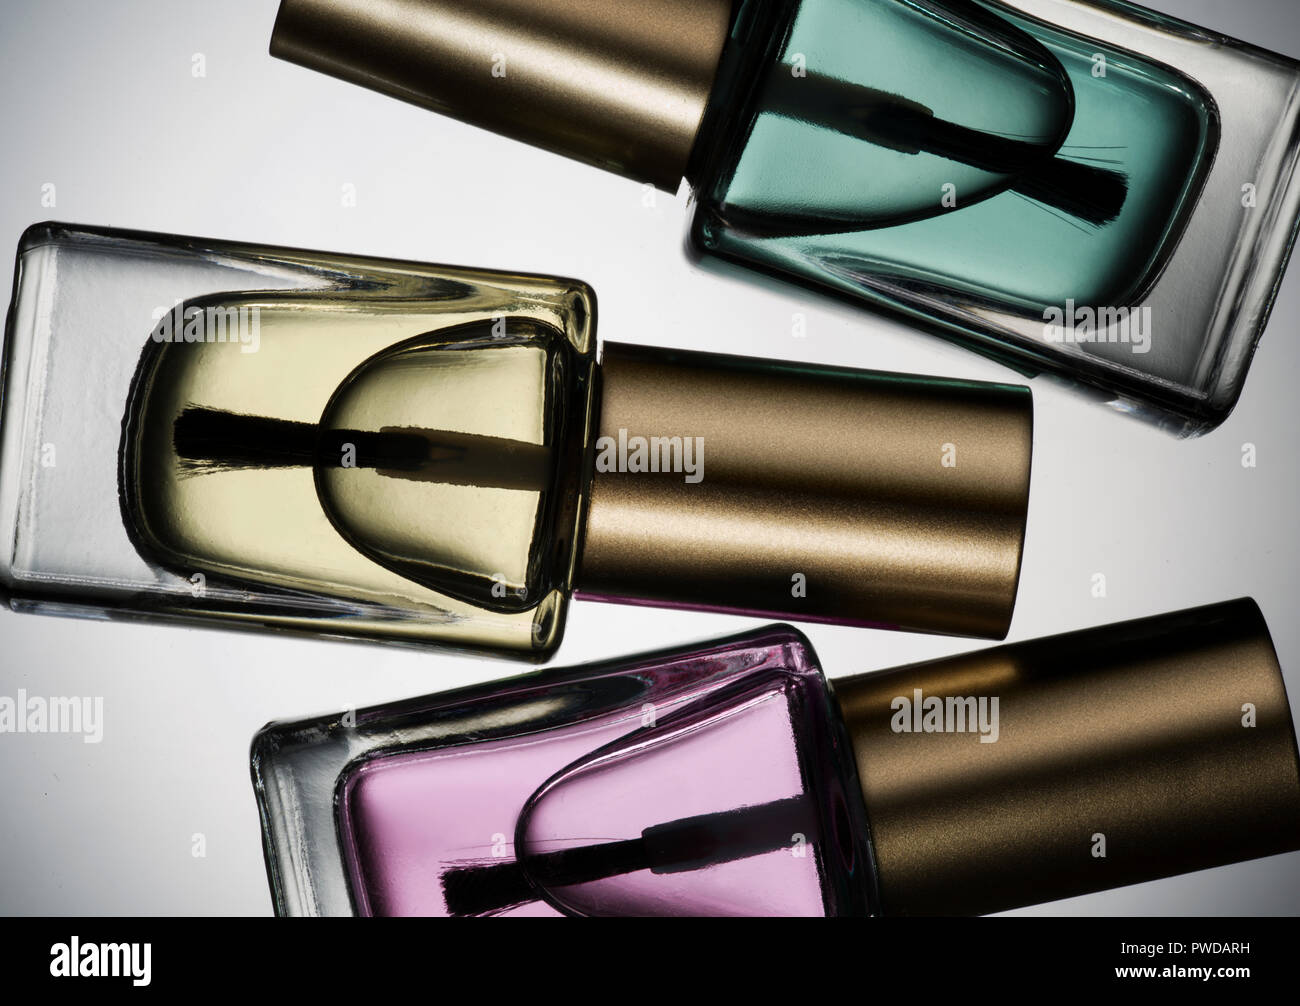 Bottles of Color Clear of Nail Polish, Top Coat, Lacquer, Paint, Cosmetics, Translucent Stock Photo